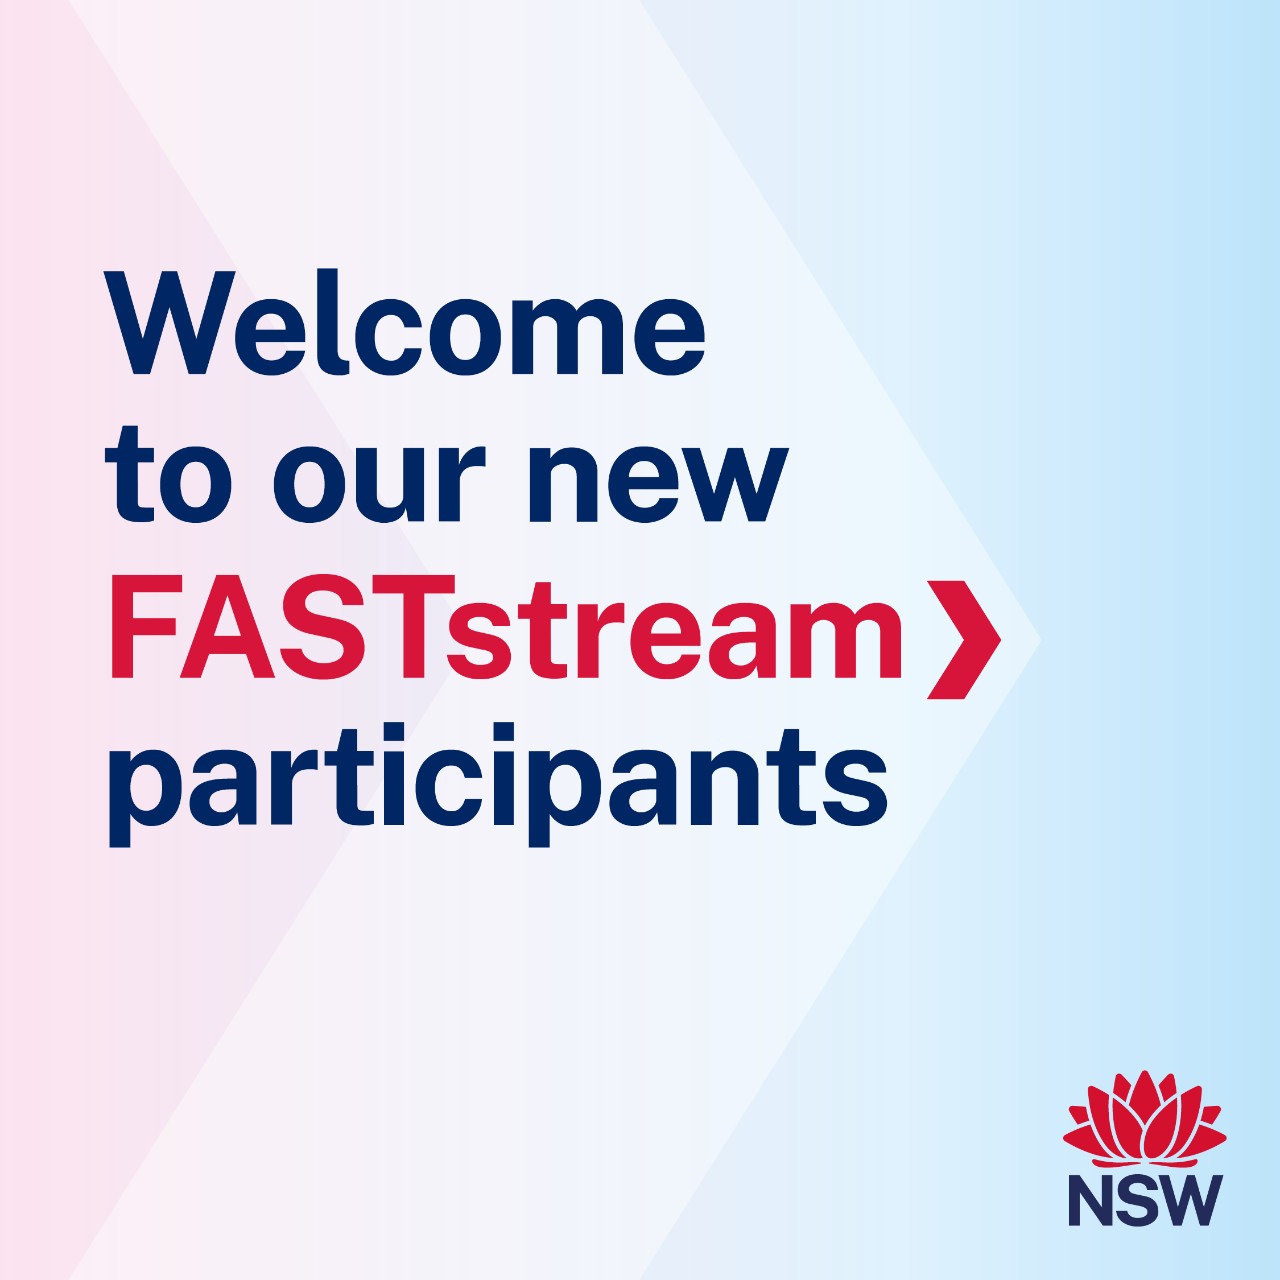 Welcome to our new FASTstream participants